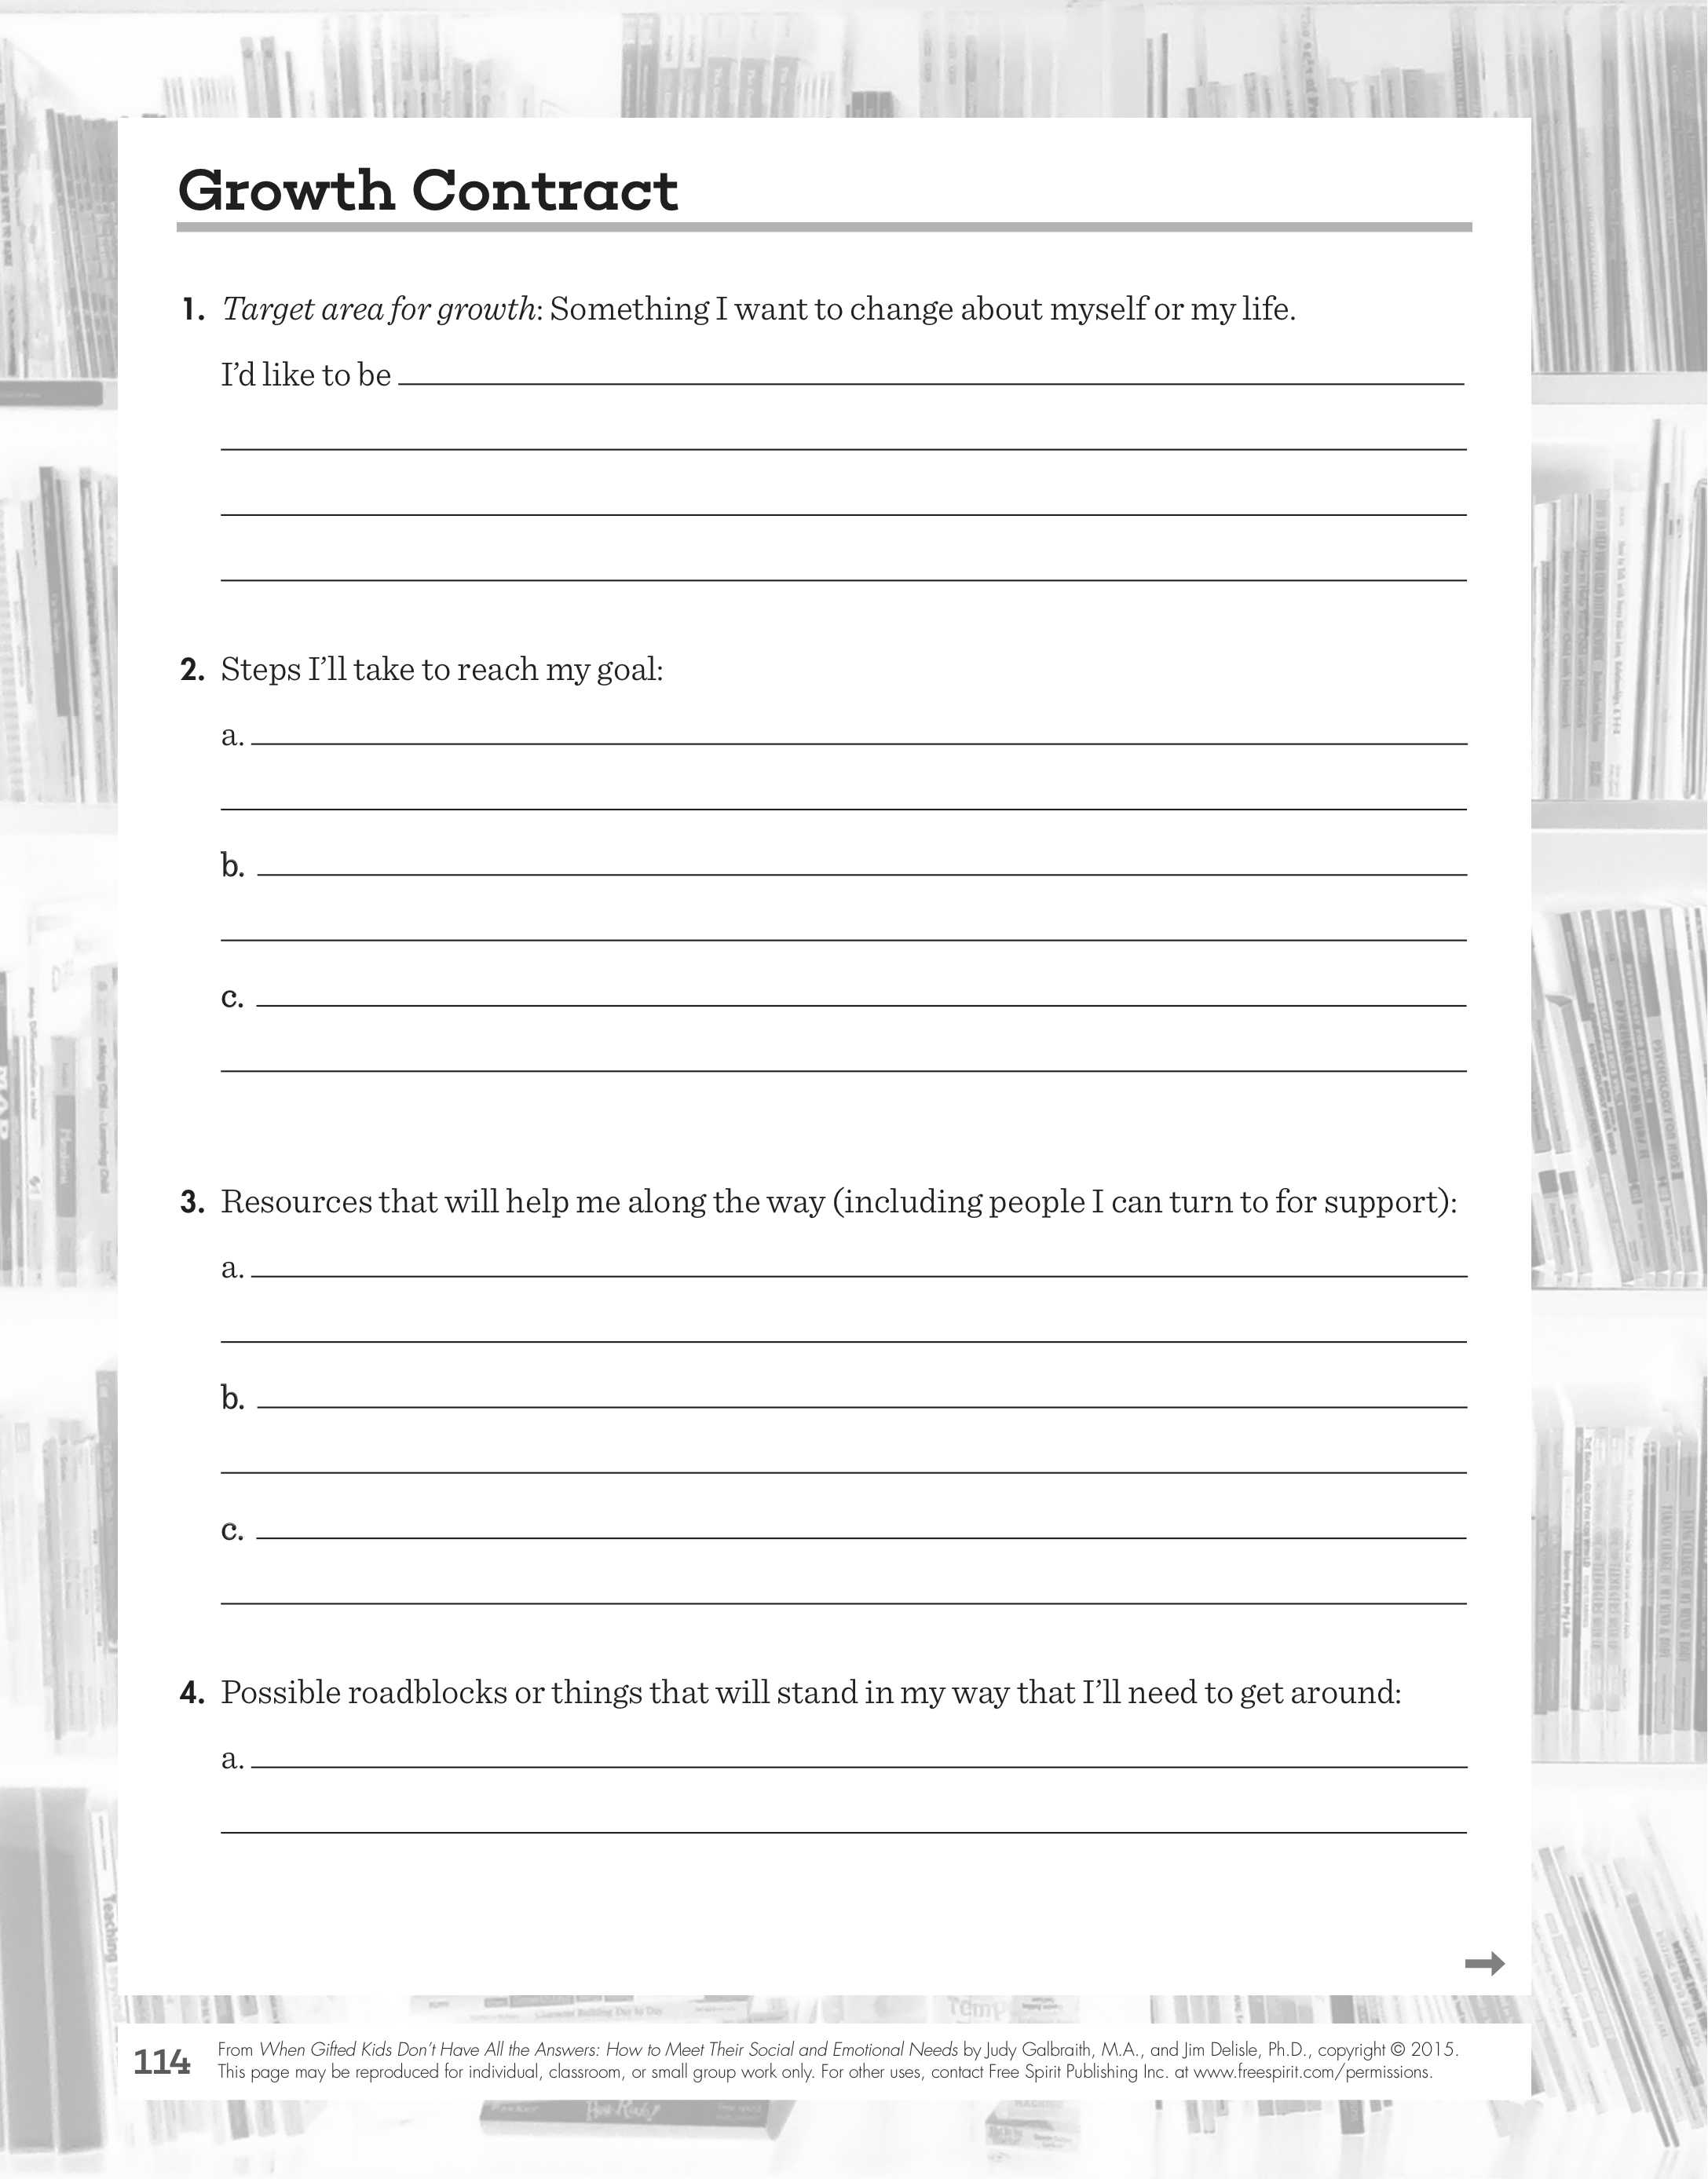 Constitution Scavenger Hunt Worksheet Answer Key as Well as Education Worksheets Answers Best Human Evolution Worksheet